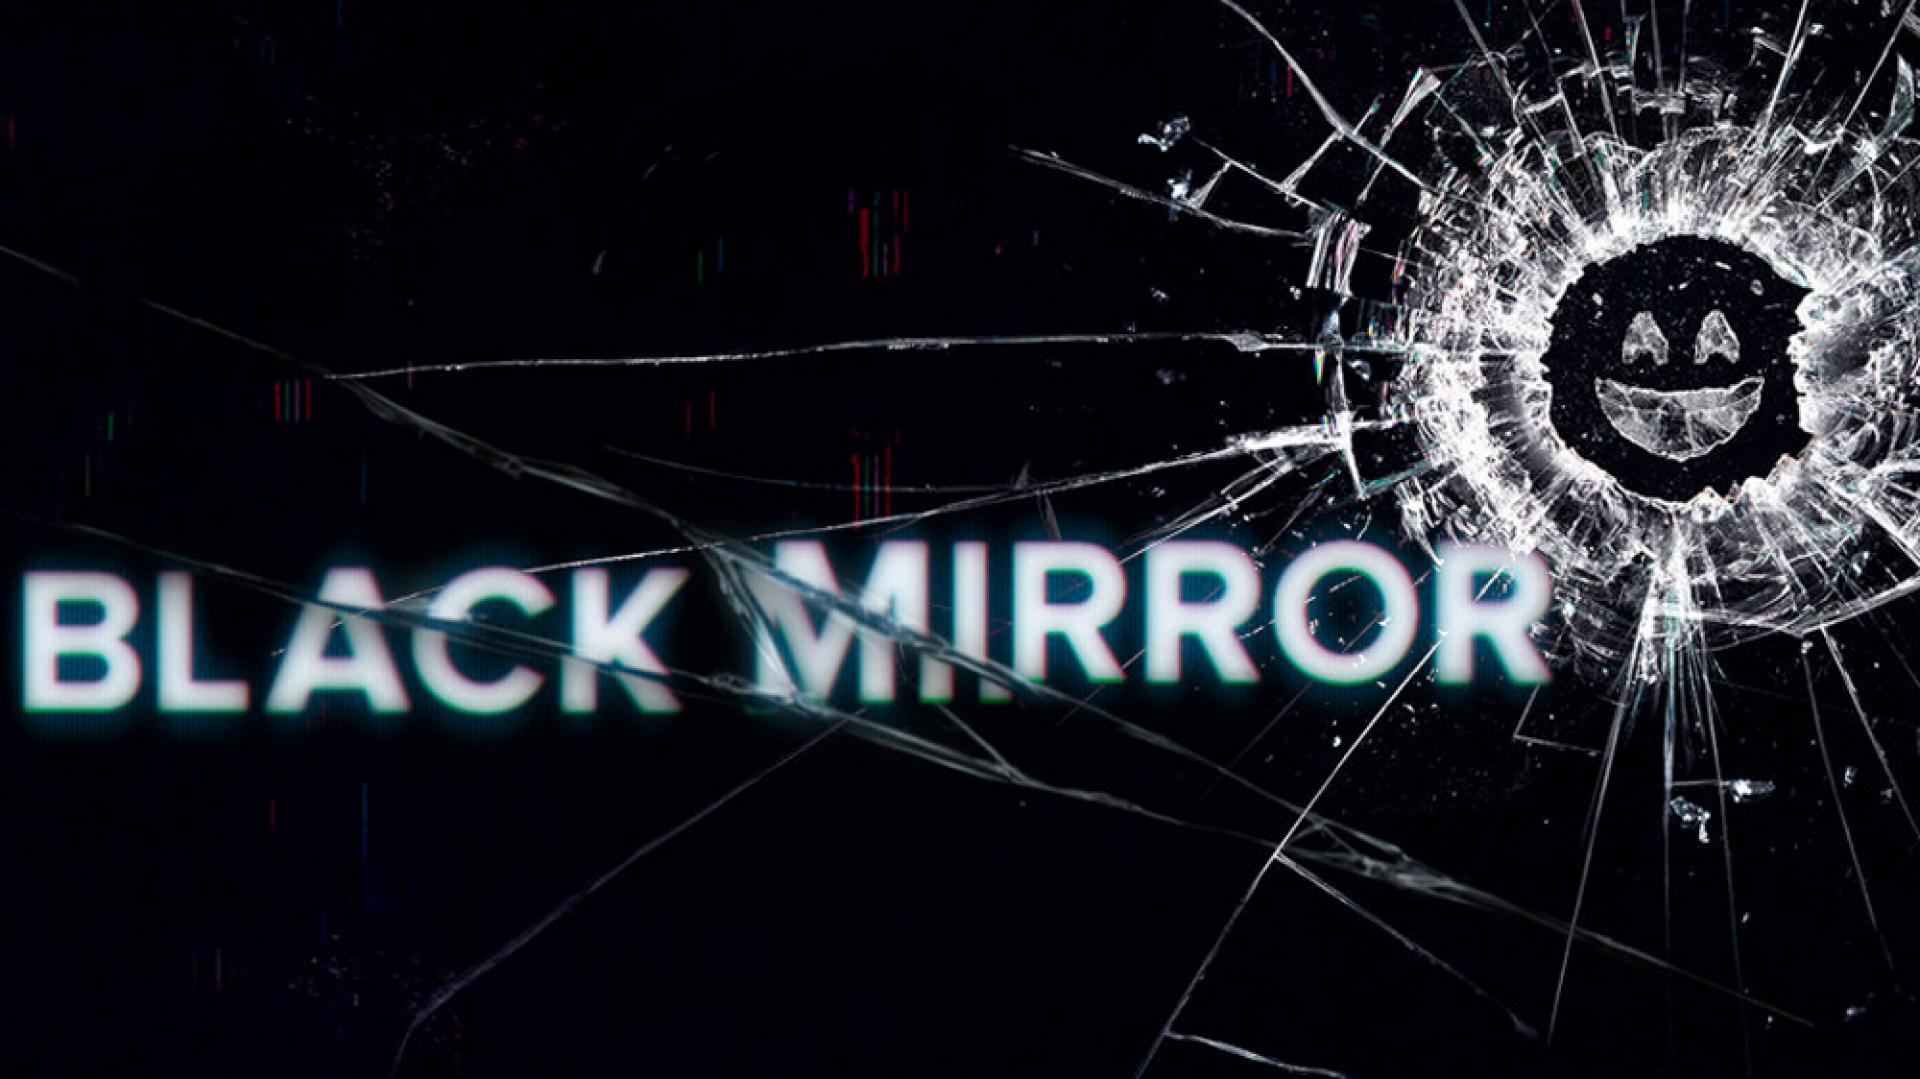 Black Mirror' Will Return for a Fifth Season | Telly Visions